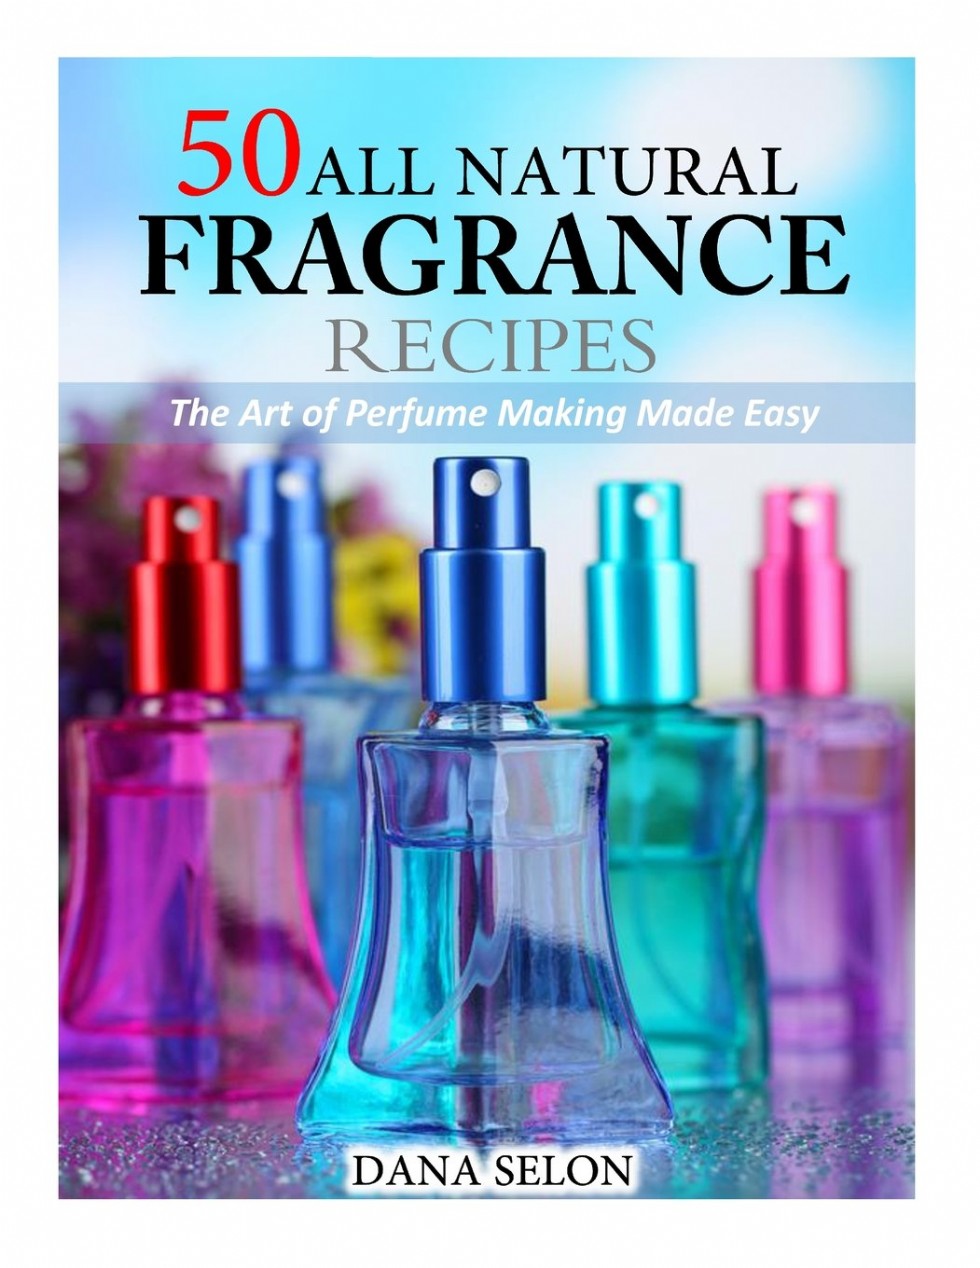 50 All Natural Fragrance Recipes The Art of Perfume Making Made Easy